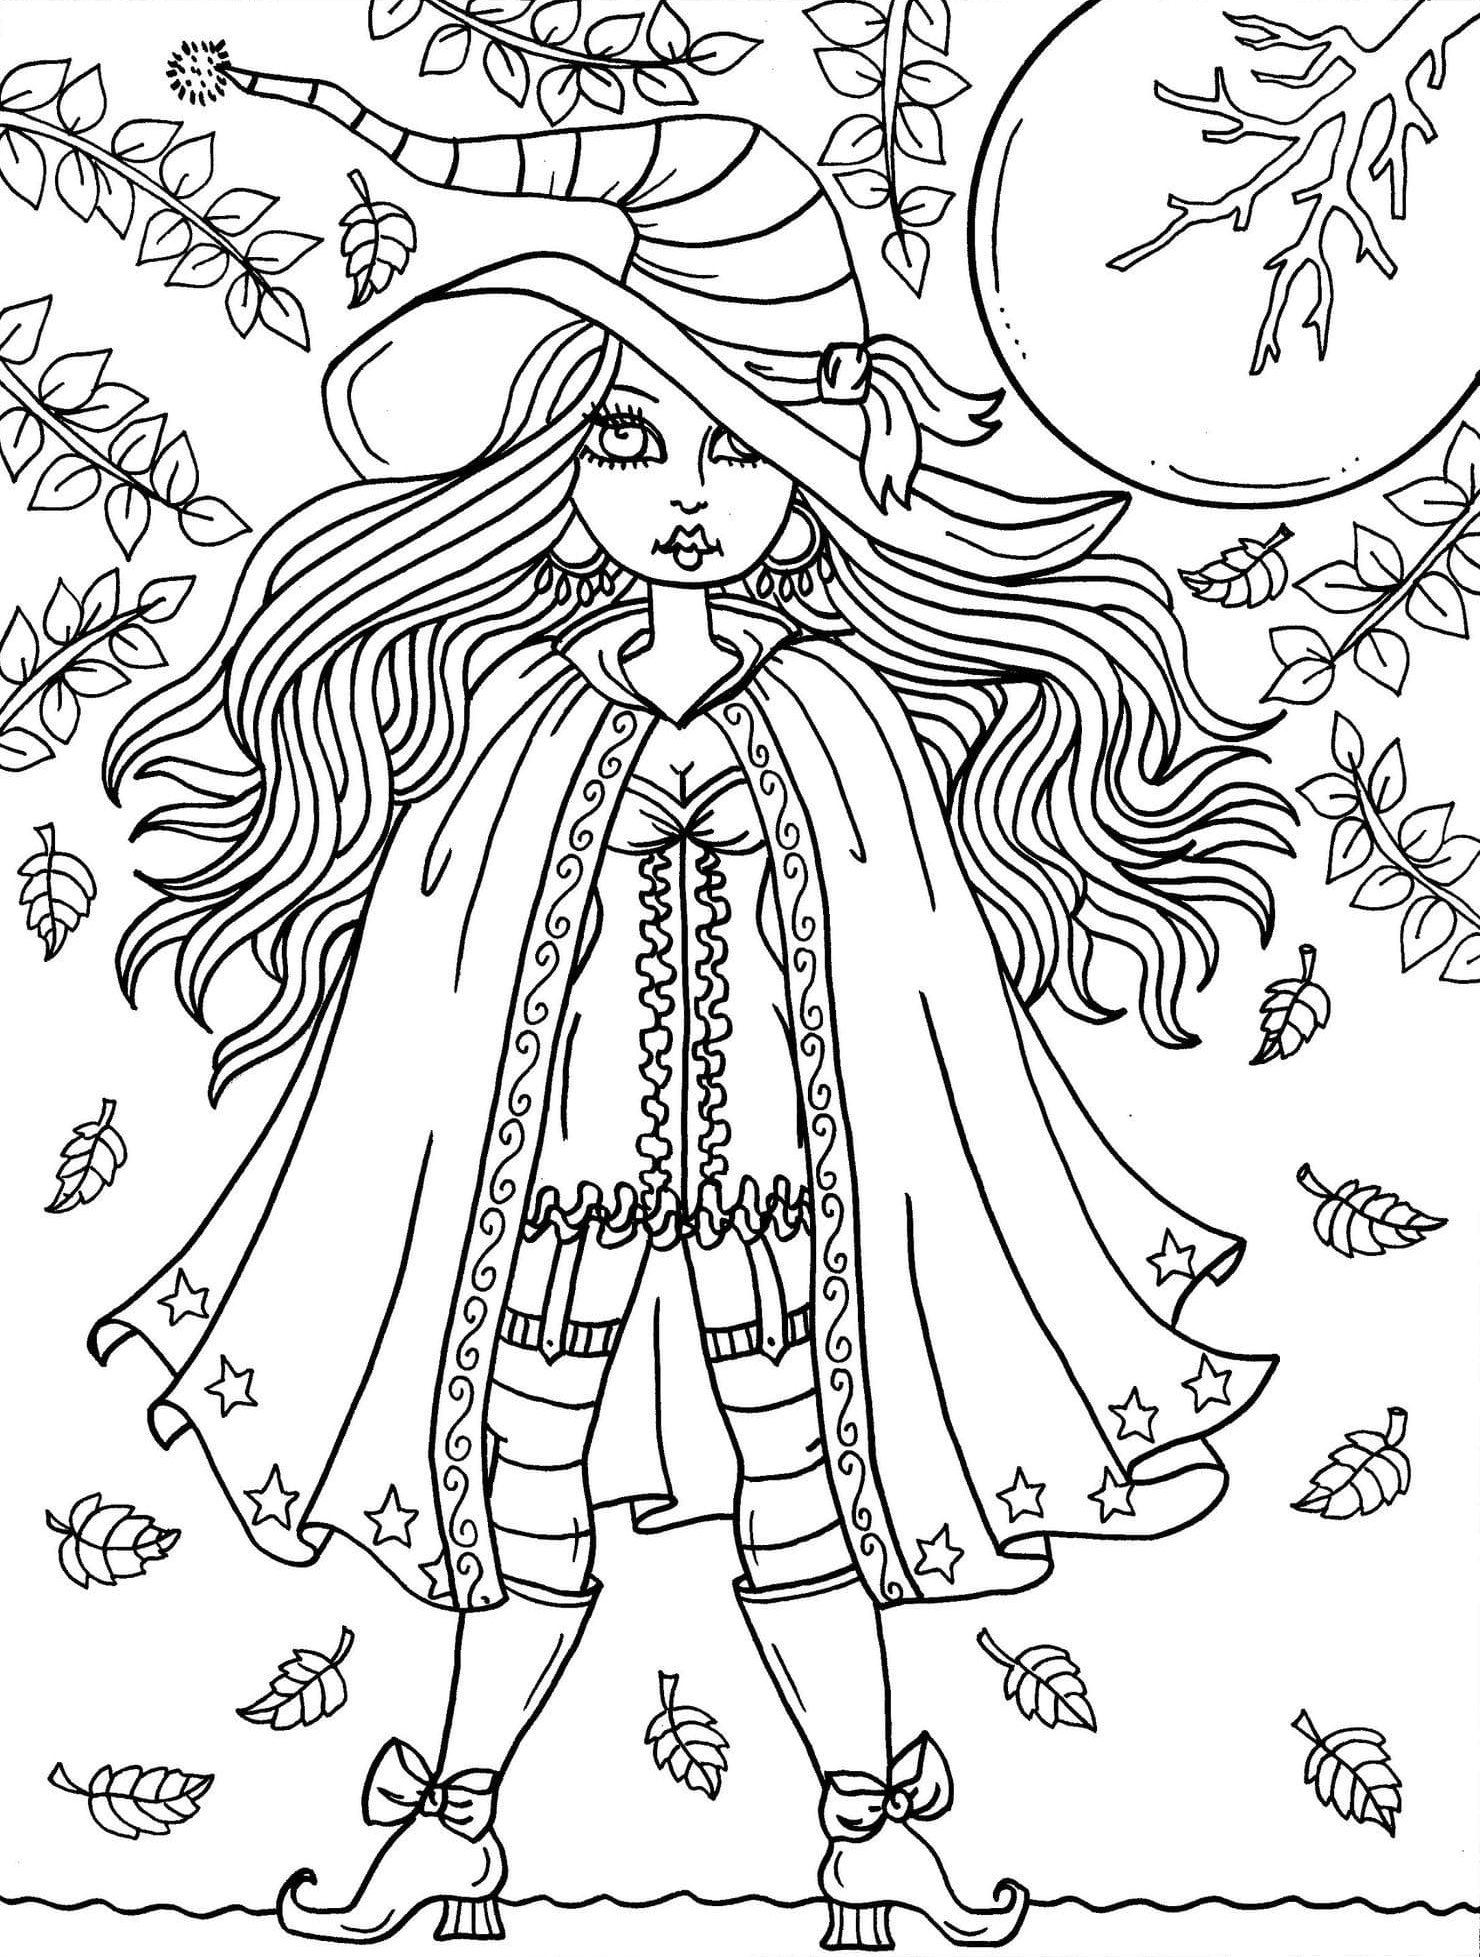 Sarah Wearing A Big Witch Hat Coloring Page (Printable)